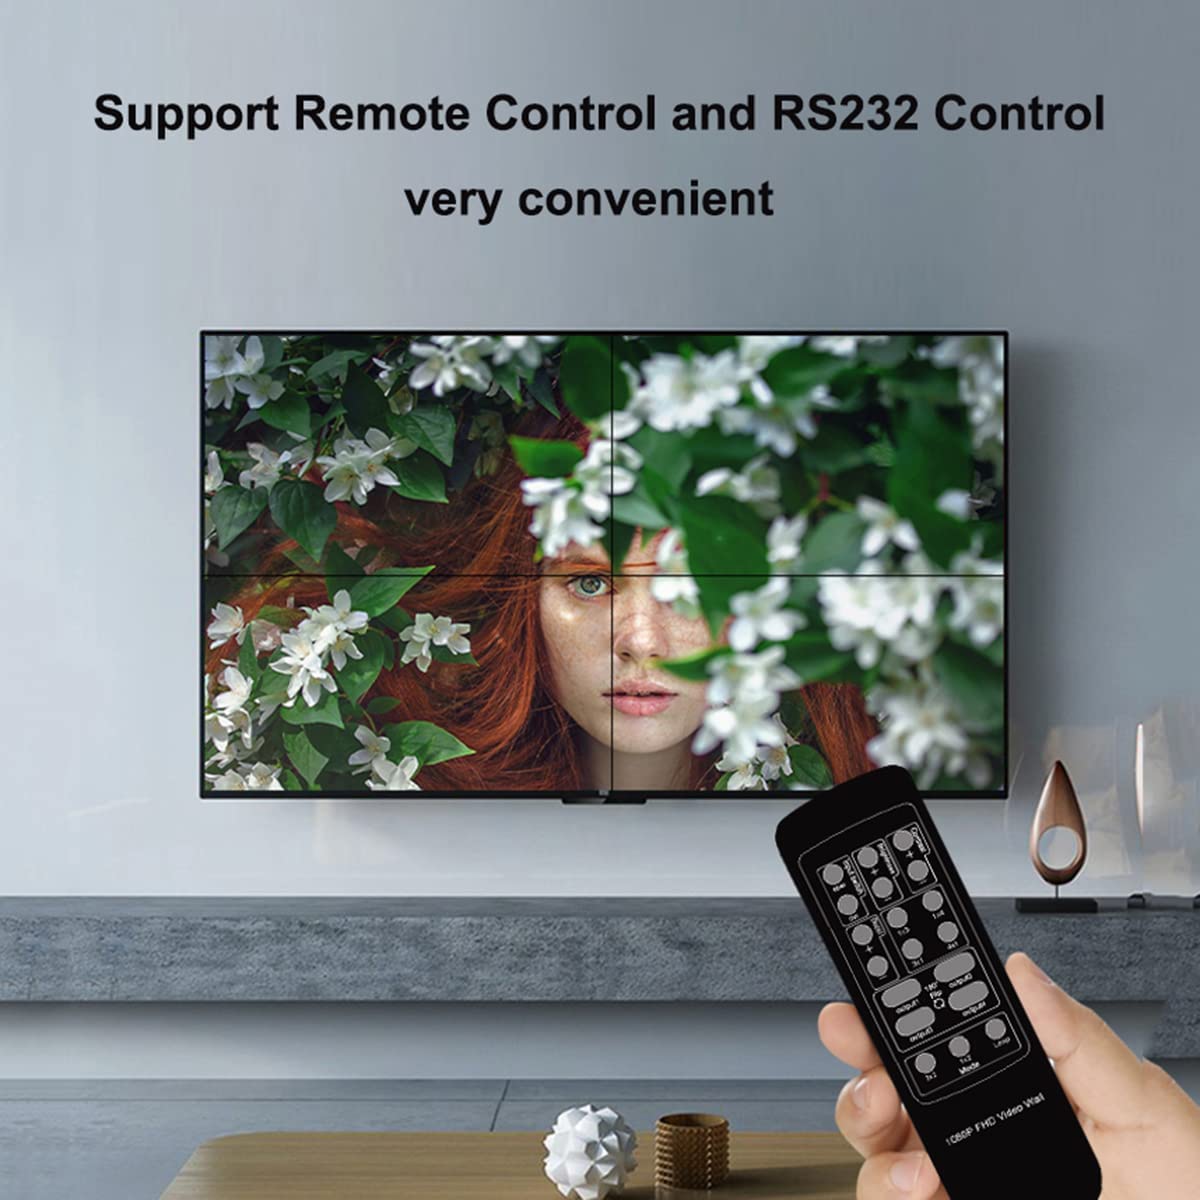 HF-VWC22A: 2x2 Video Wall Controller, 1080P@60HZ HD Display, 180 Degree Rotate, 8 Display Modes - 2x2, 1x2, 1x3, 1x4, 2x1, 3x1, 4x1,1 HDMI/DVI Input 4 HDMI Output with RS232 Control - Click Image to Close